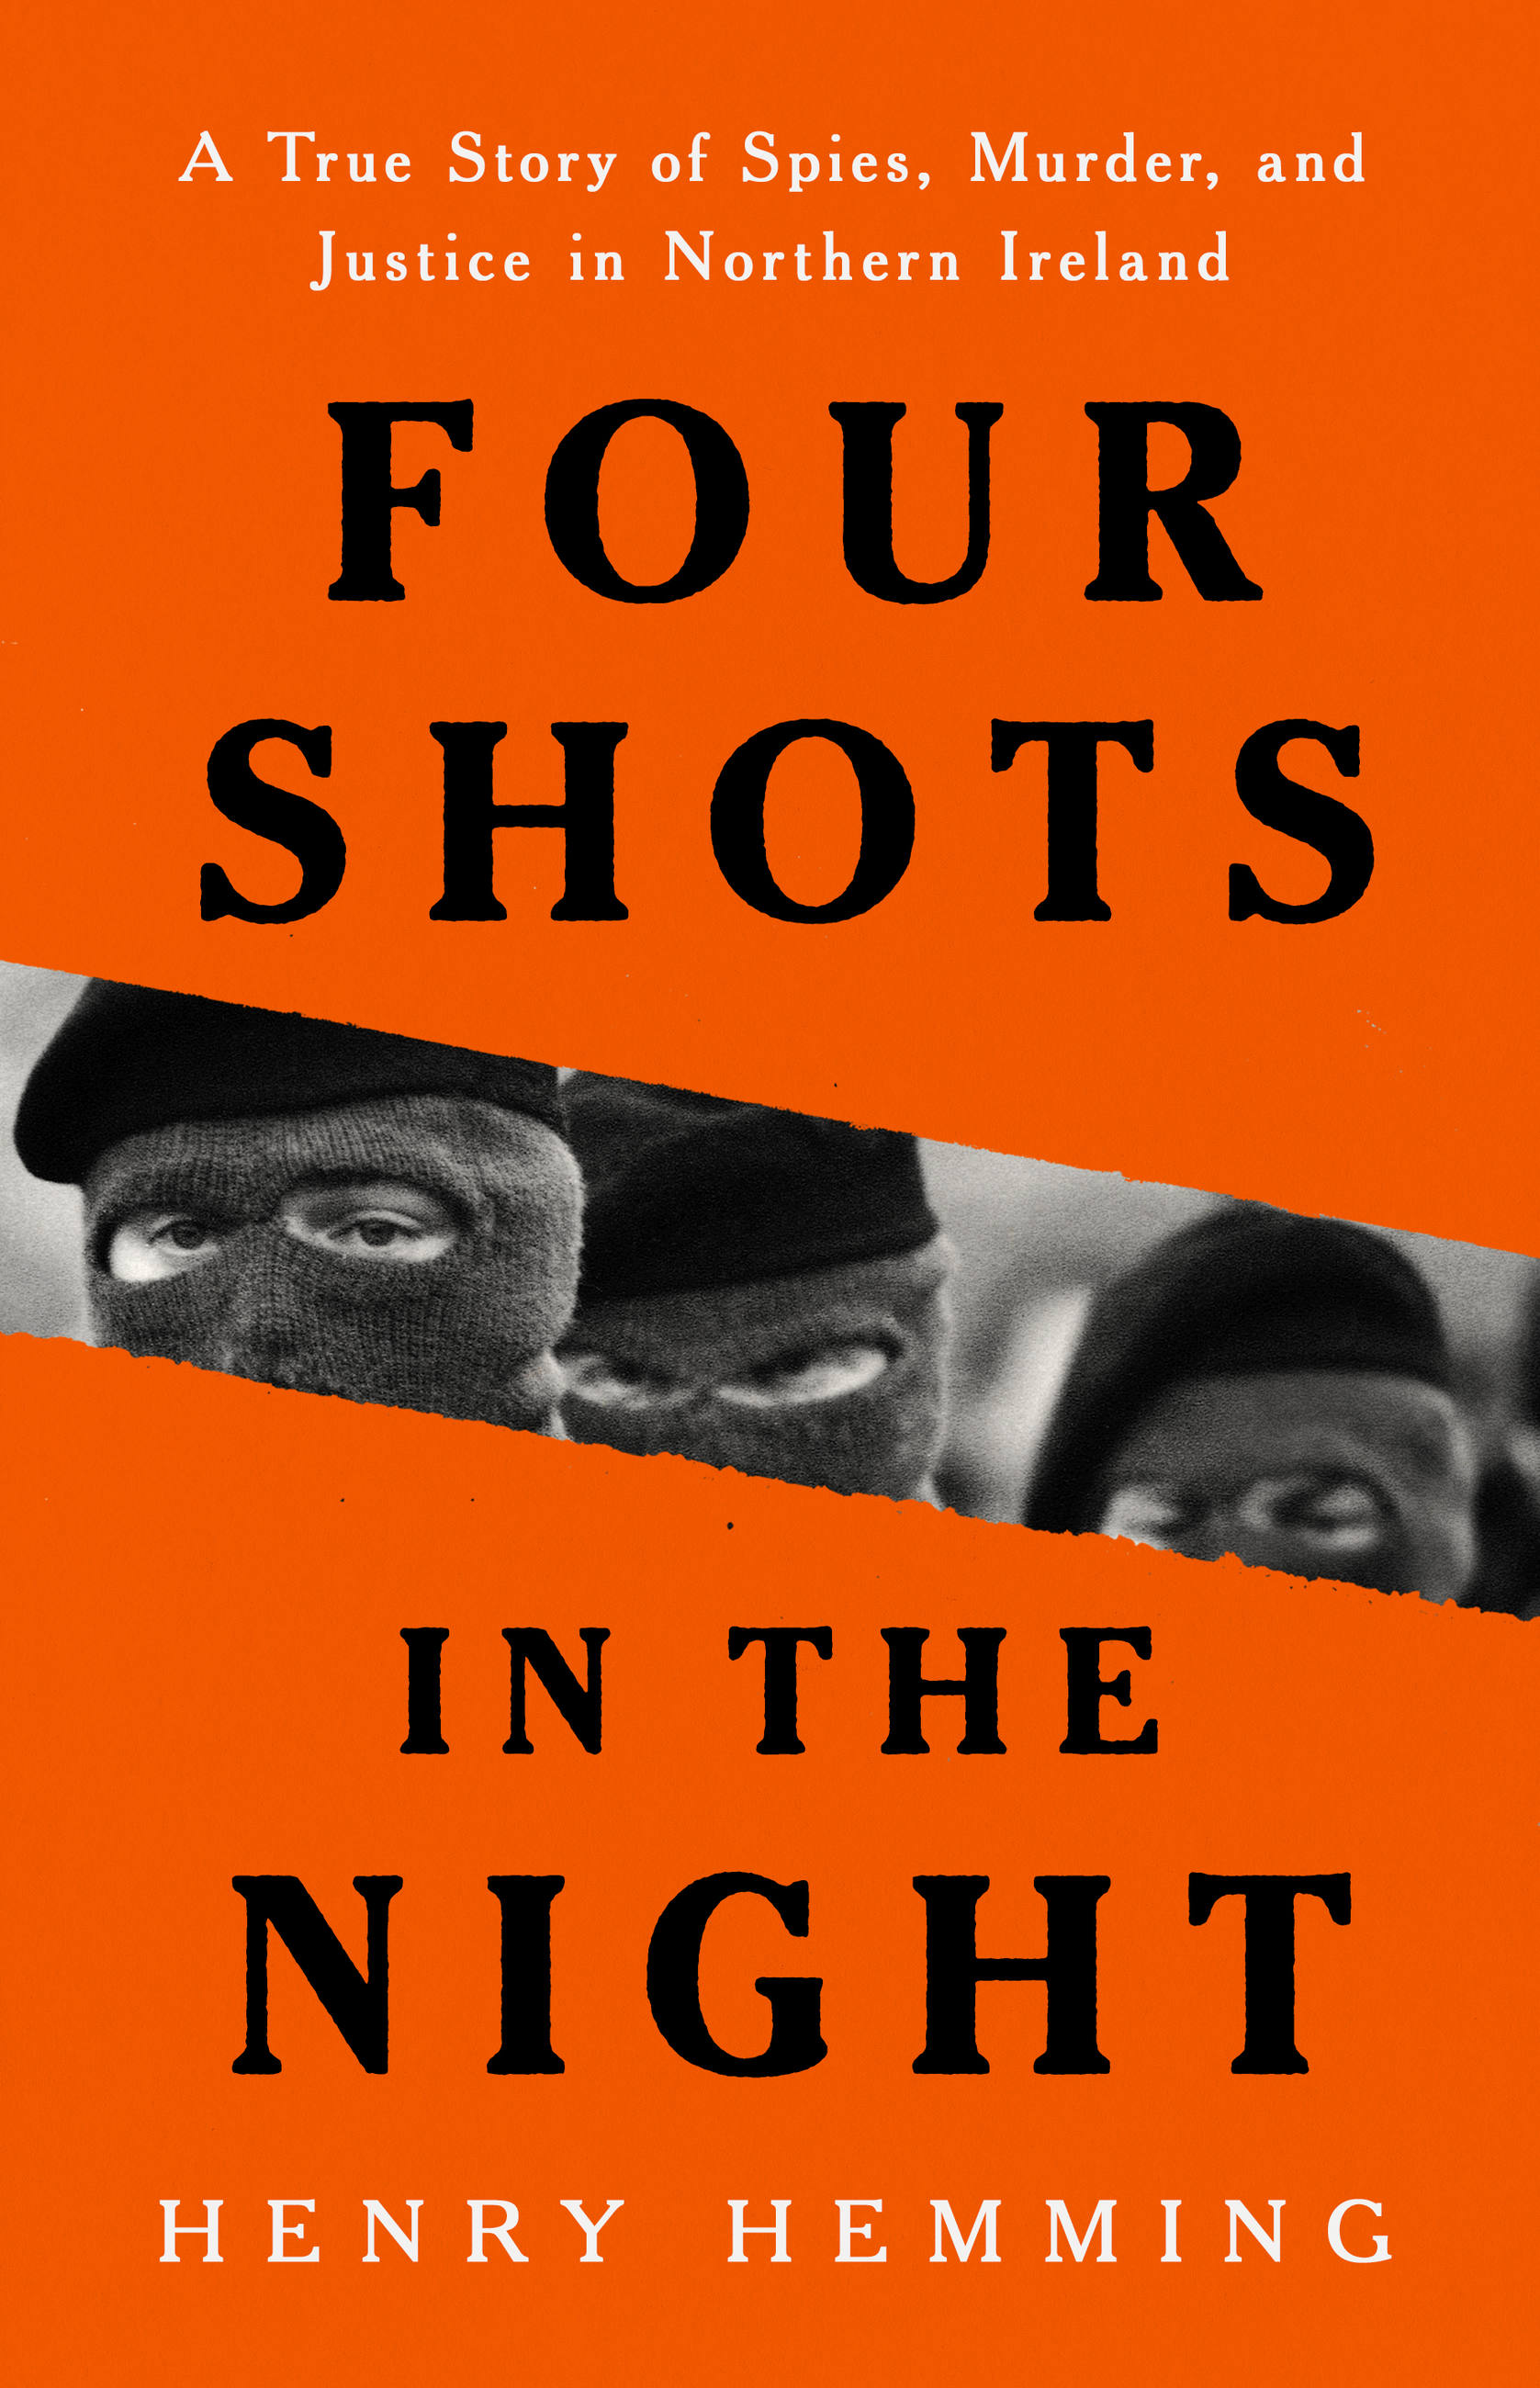 Four Shots in the Night